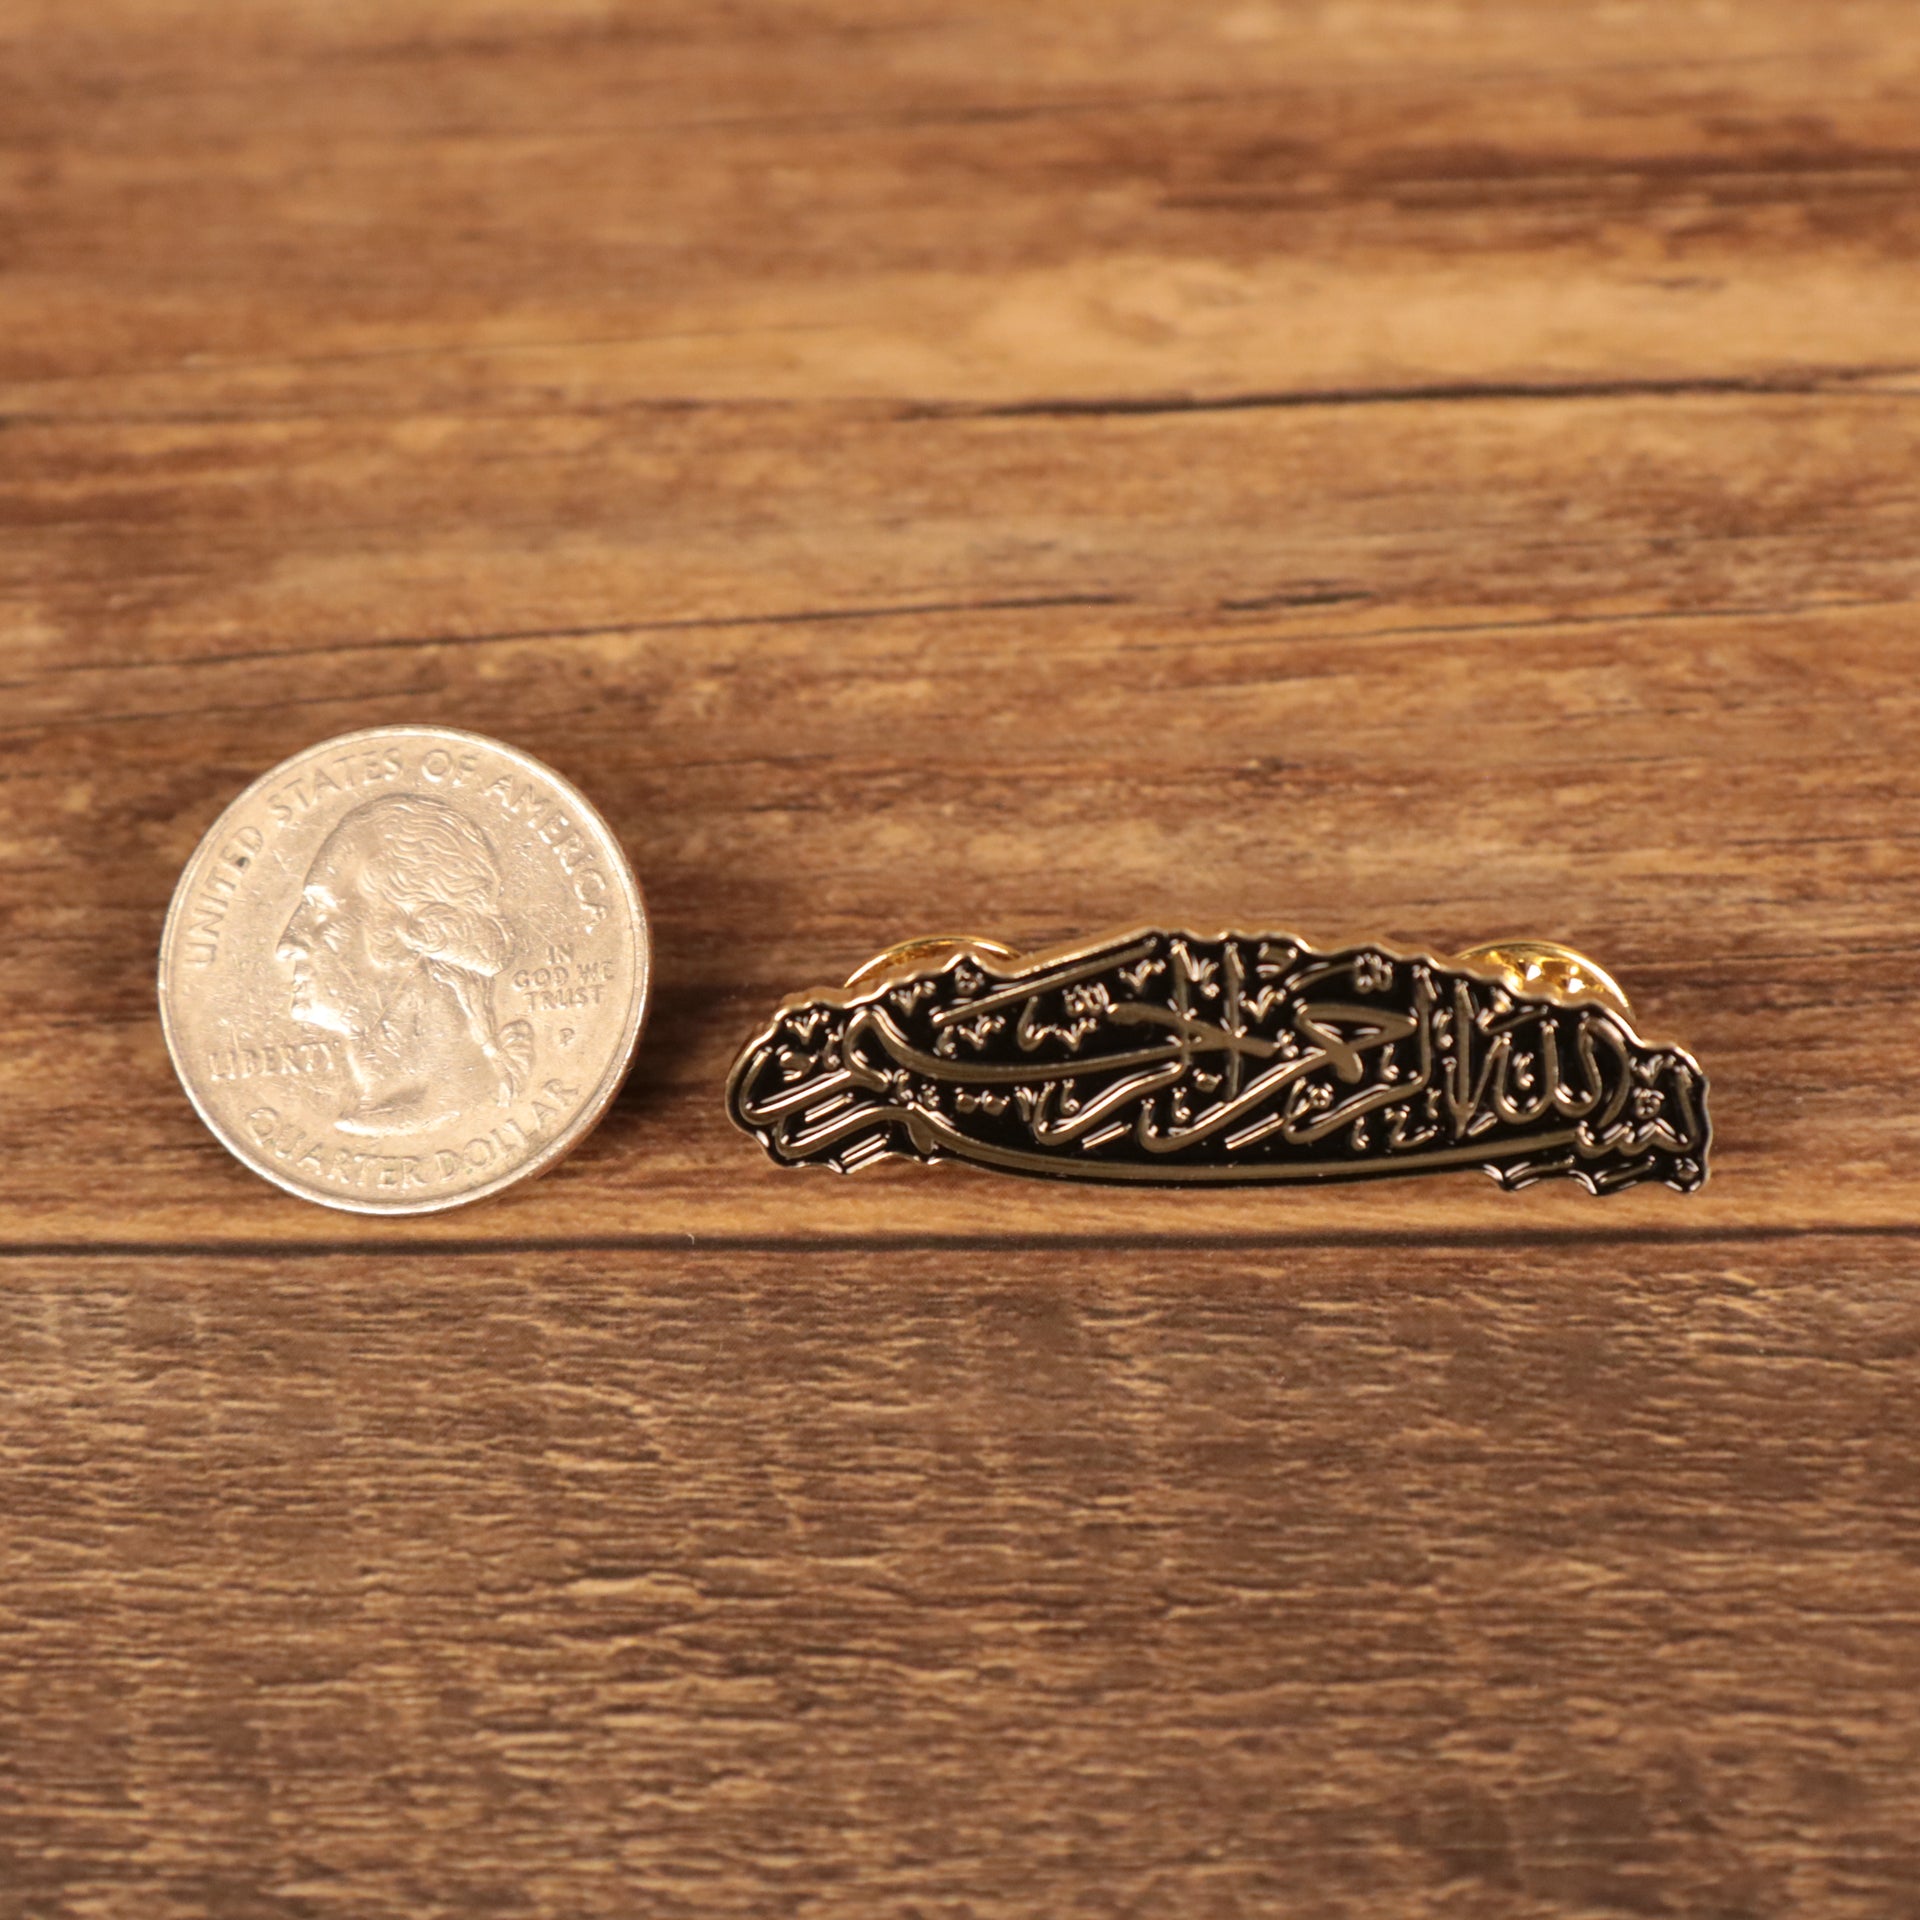 The Bismillah Arabic Calligraphy Fitted Cap Pin | Enamel Pin For Hat compared to a quarter